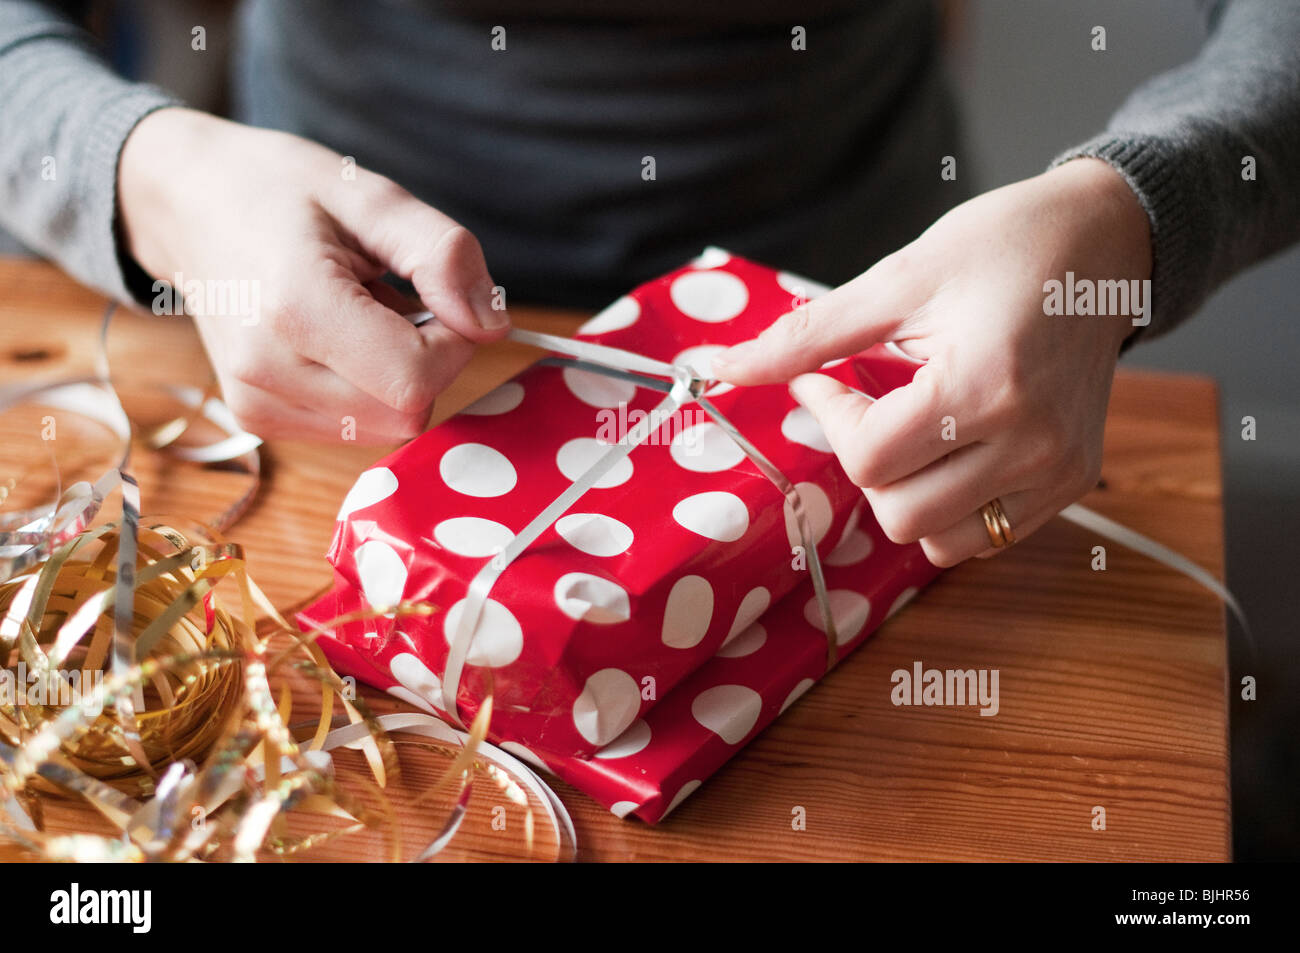 Wrapping presents-close-up Stock Photo